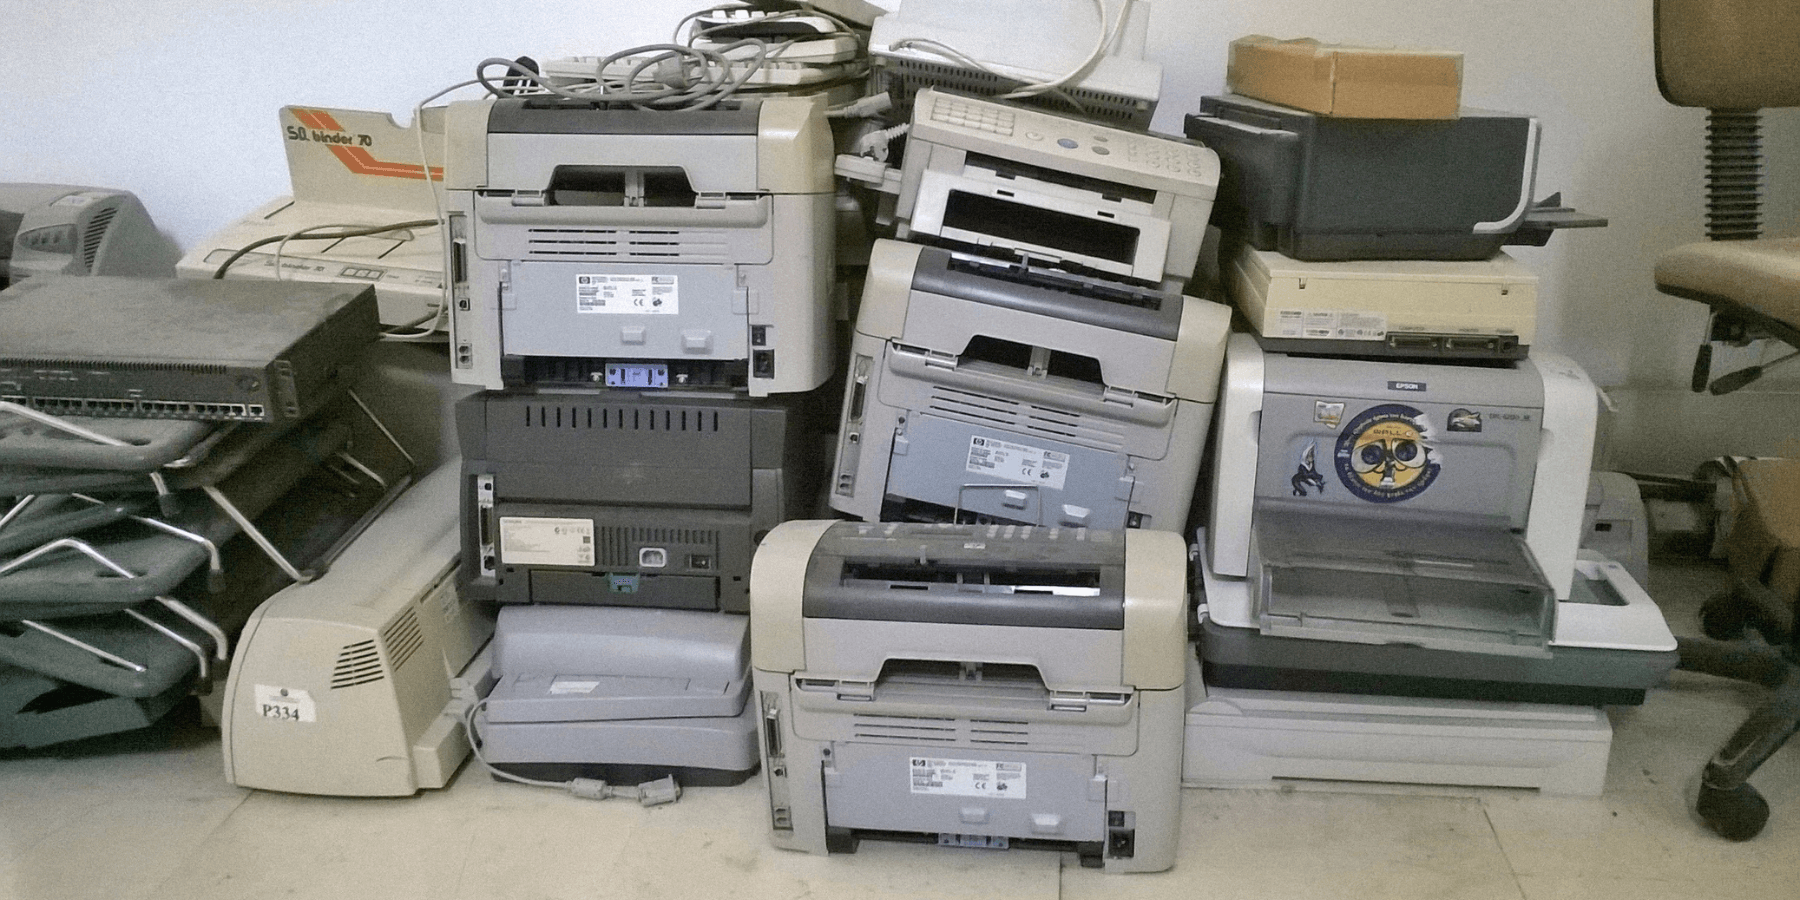 A large stack of unused printers piled haphazardly on top of each other, symbolizing excess and redundancy in office equipment.